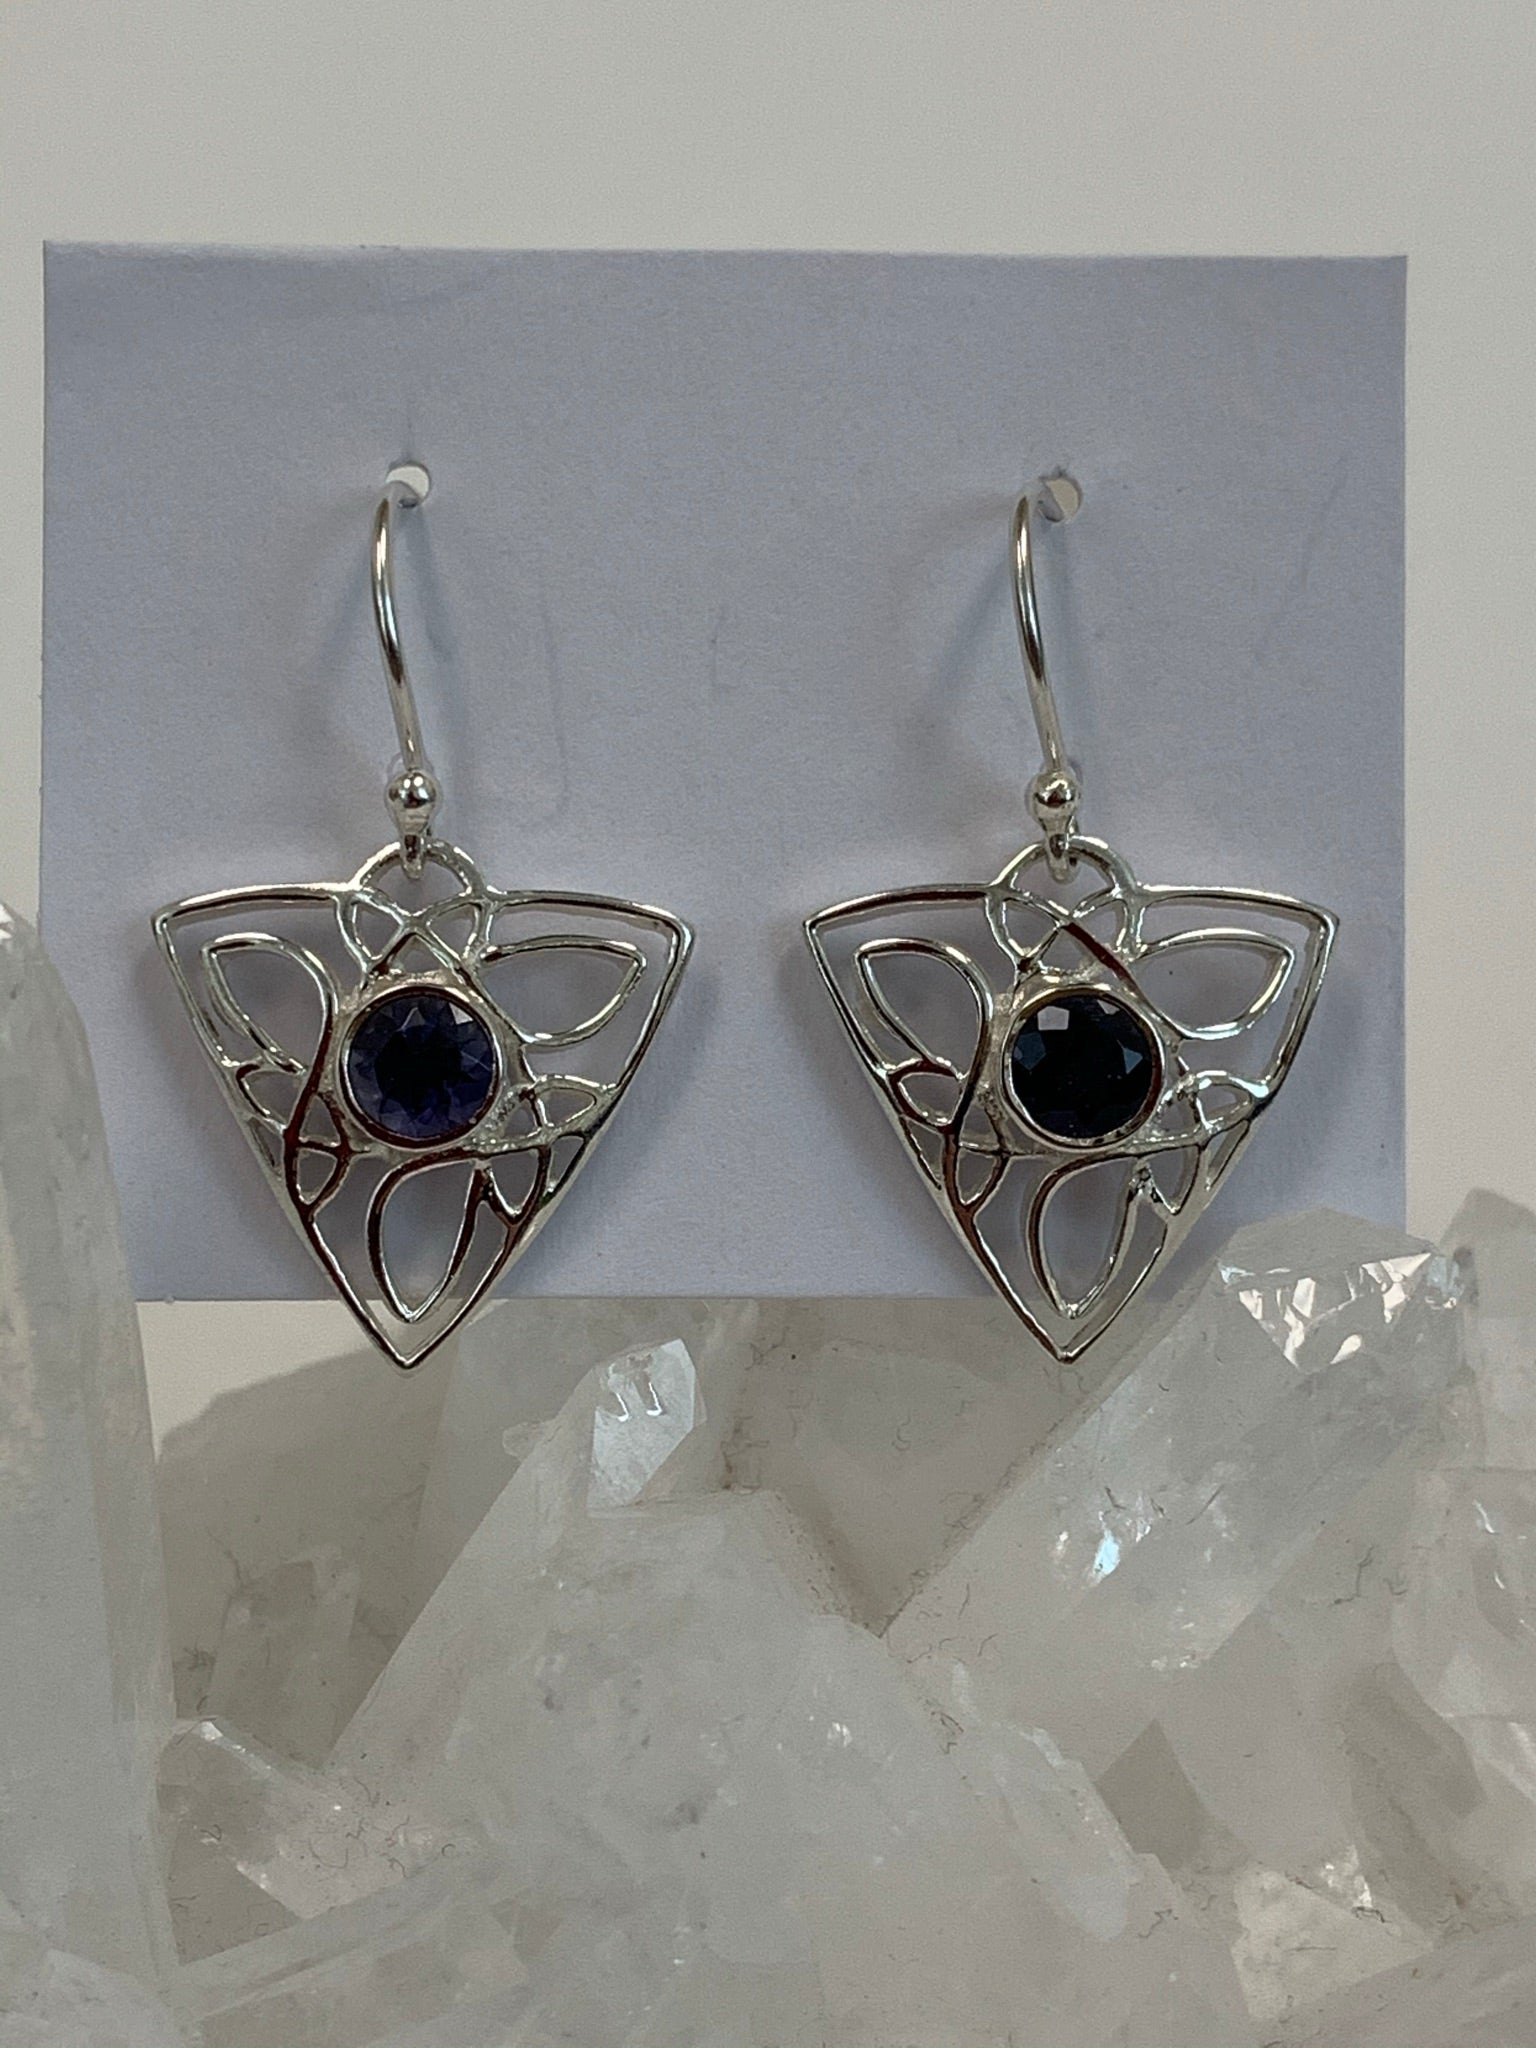 Close-up view. Faceted blue iolite gemstones are set in the middle of a fancy and flowing sterling silver Celtic knot. These earrings are lightweight, have wires, not posts and are approximately 1½" long.